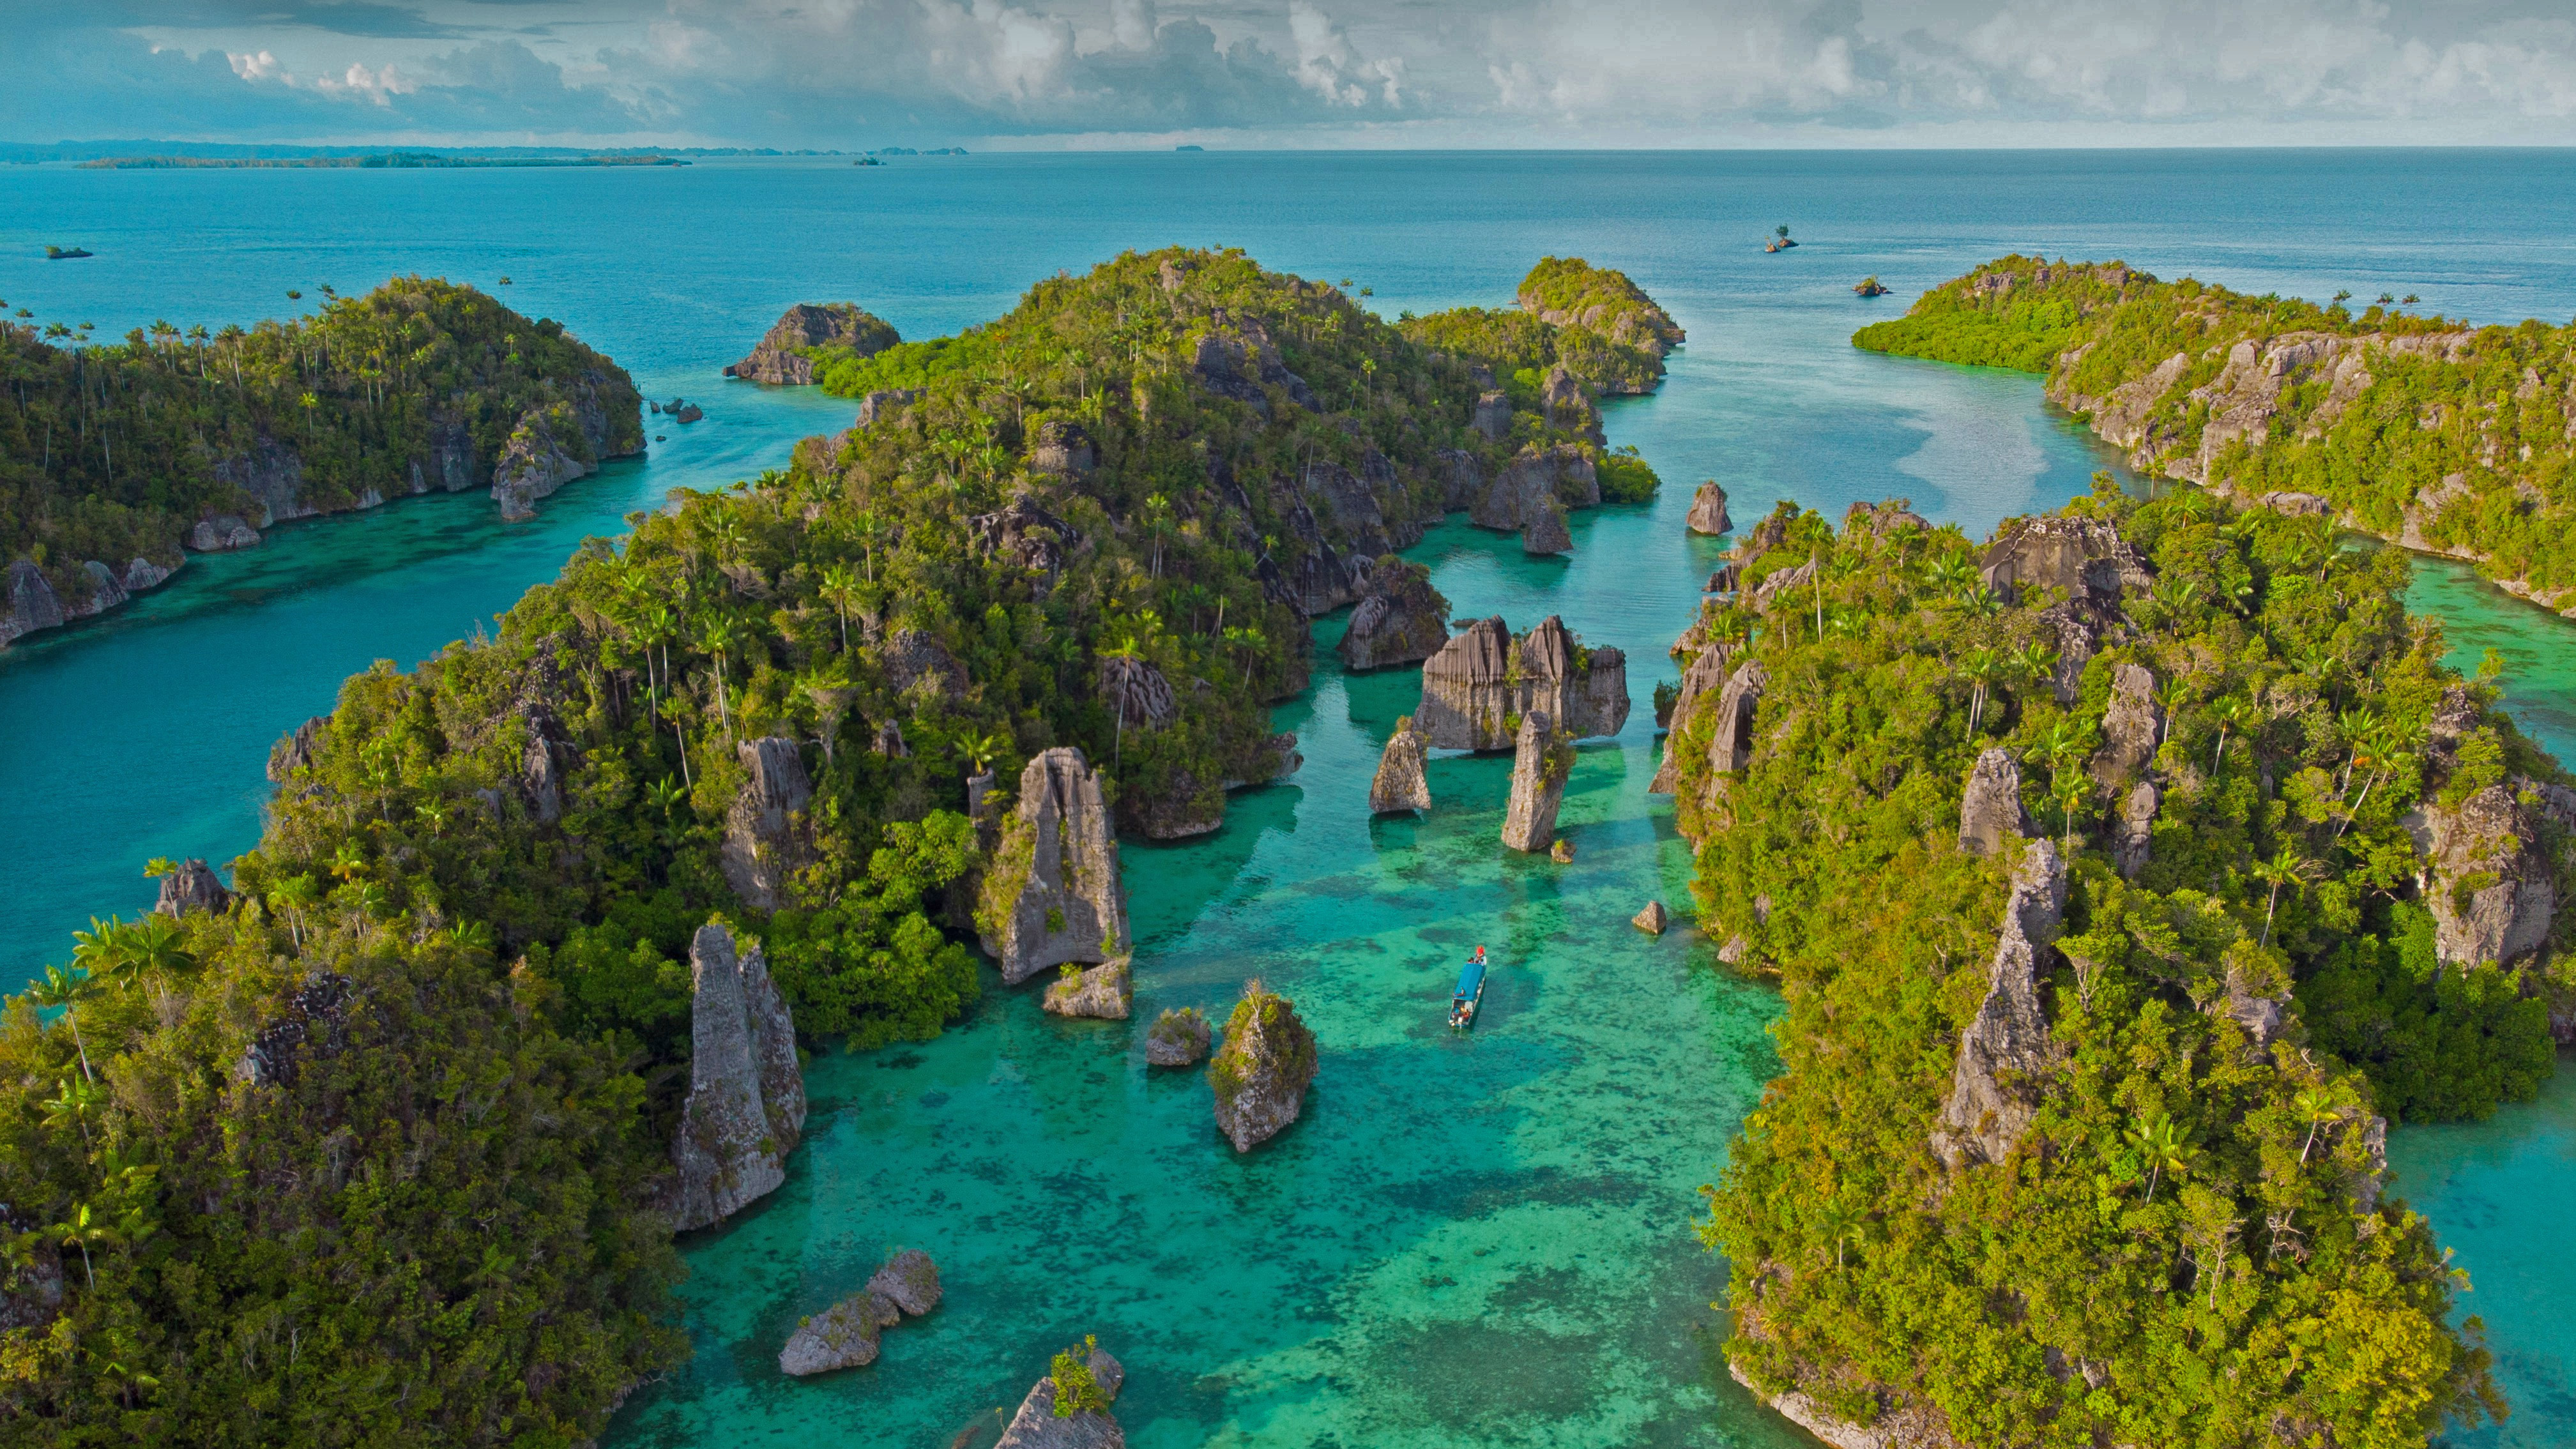 Misool Island, one of the four major islands in the Raja Ampat Islands in West Papua, Indonesia by Elsy Saldek